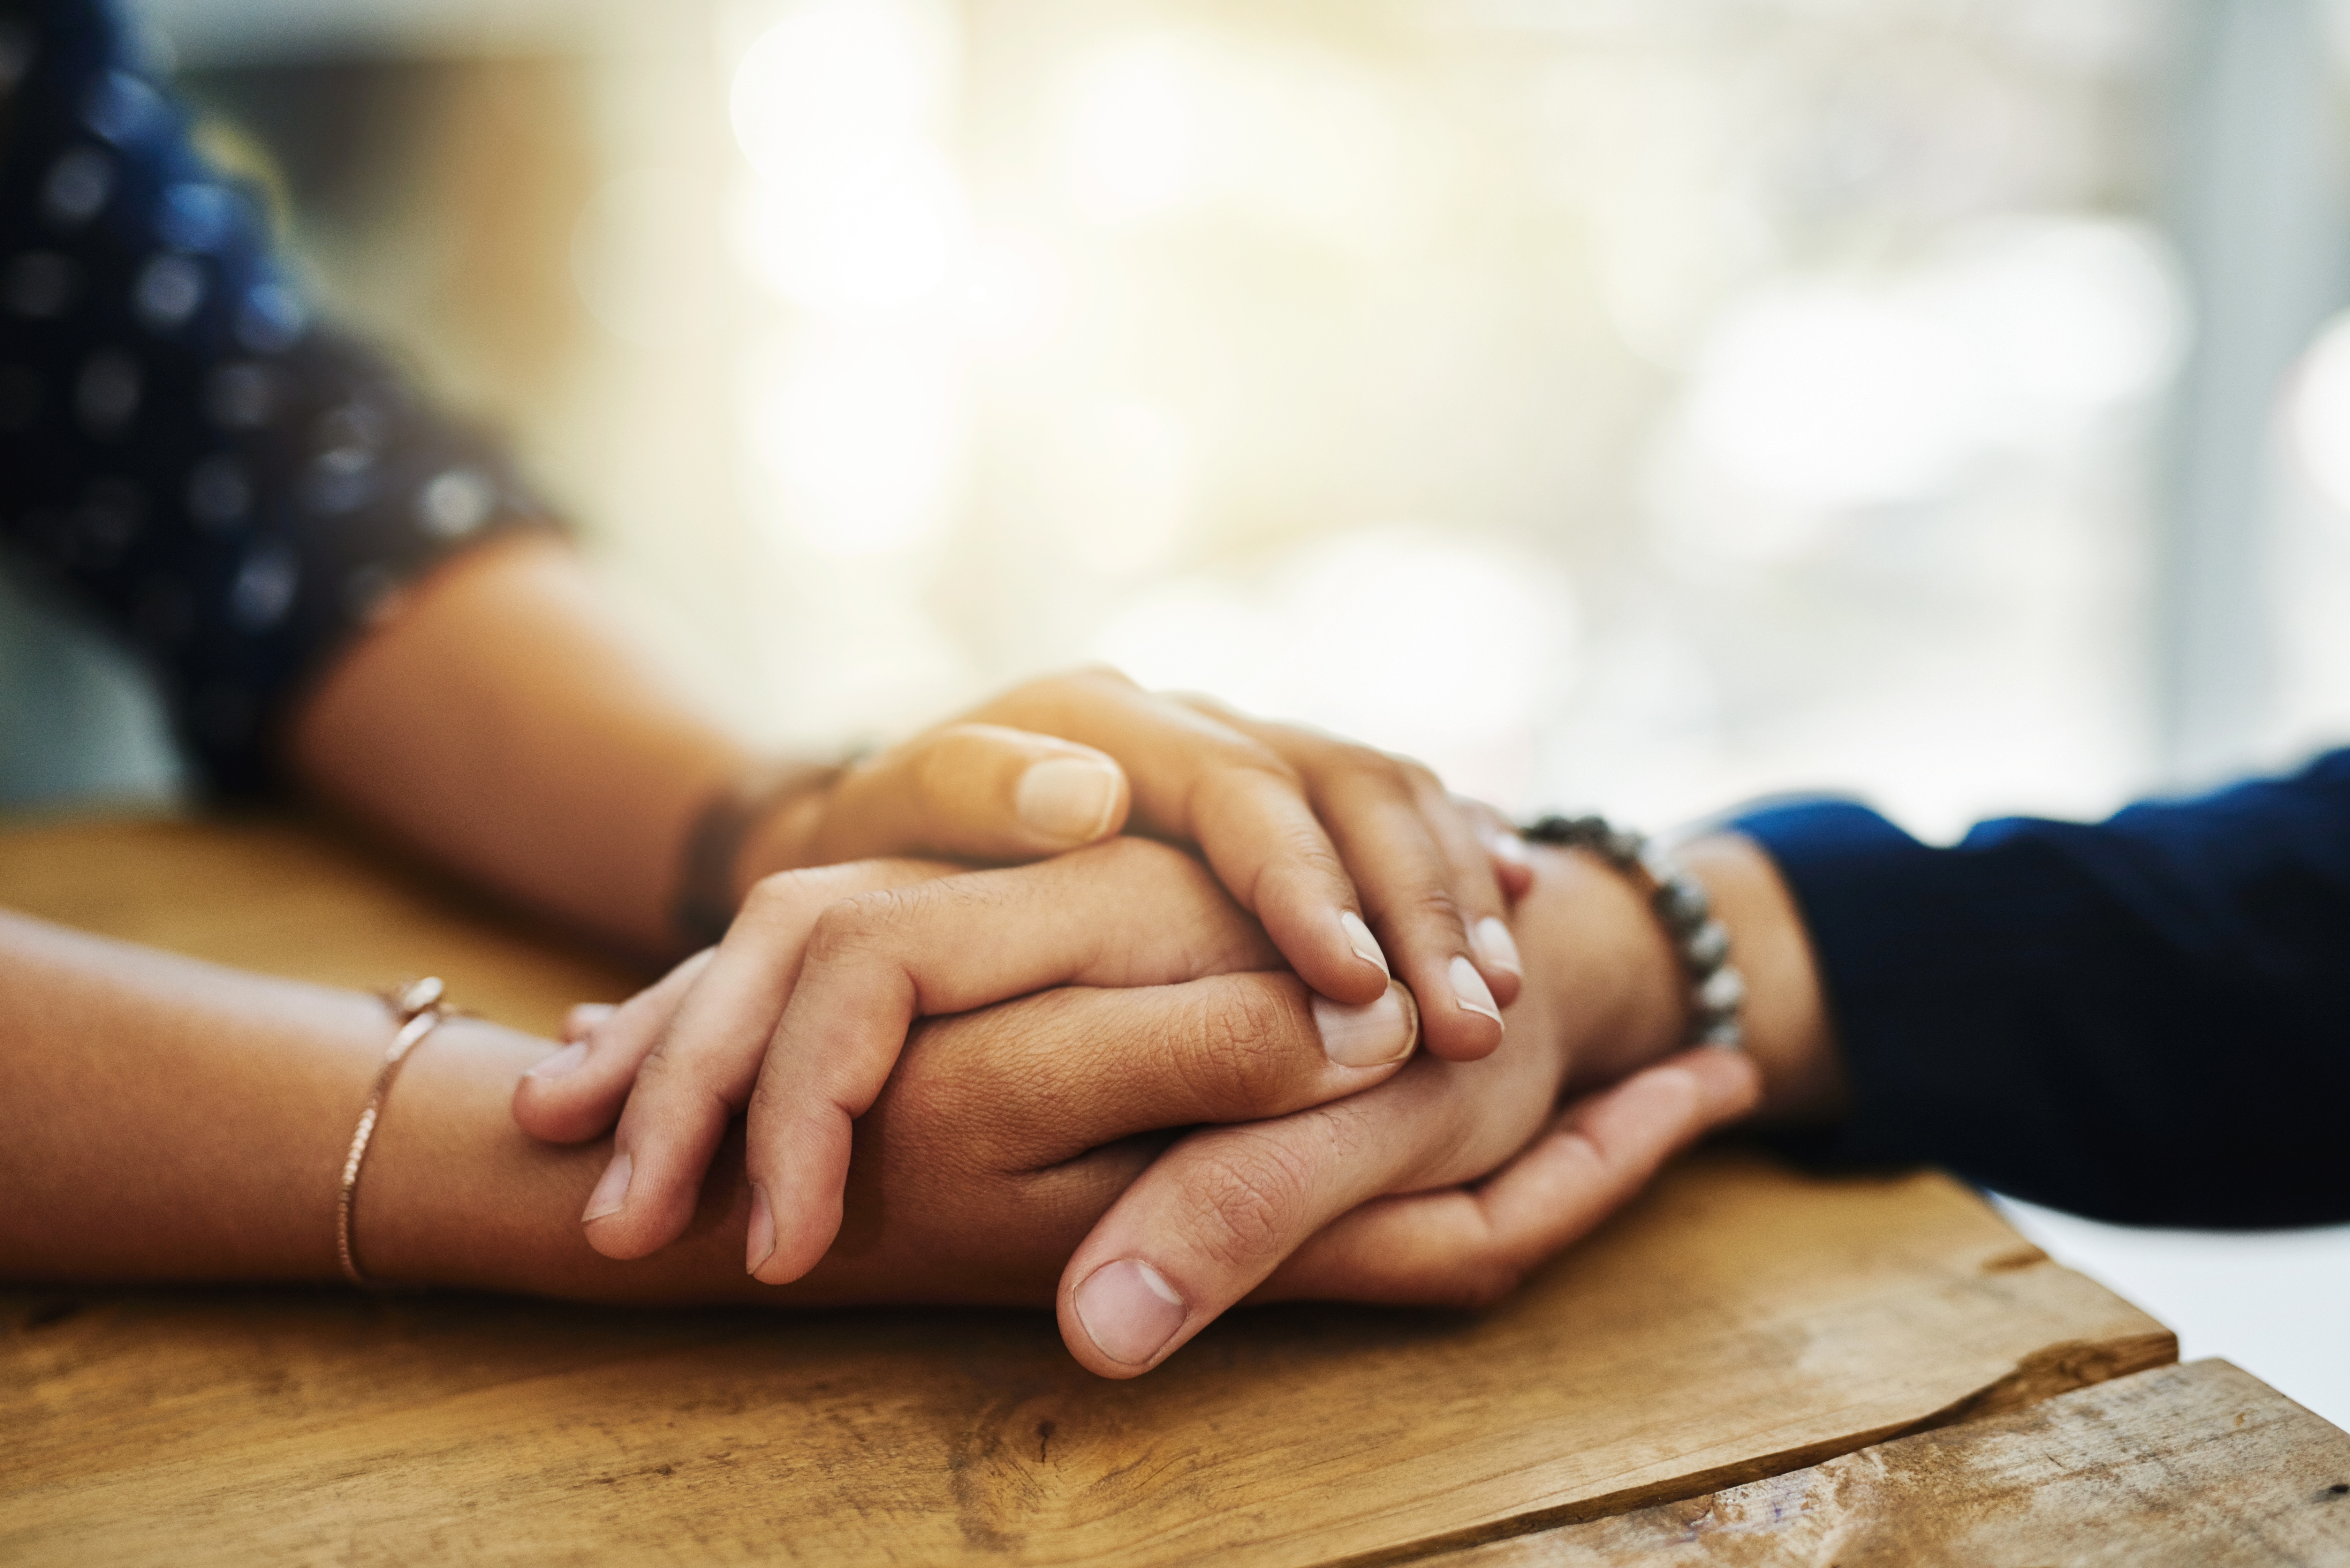 Two people holding hands | Source: Shutterstock